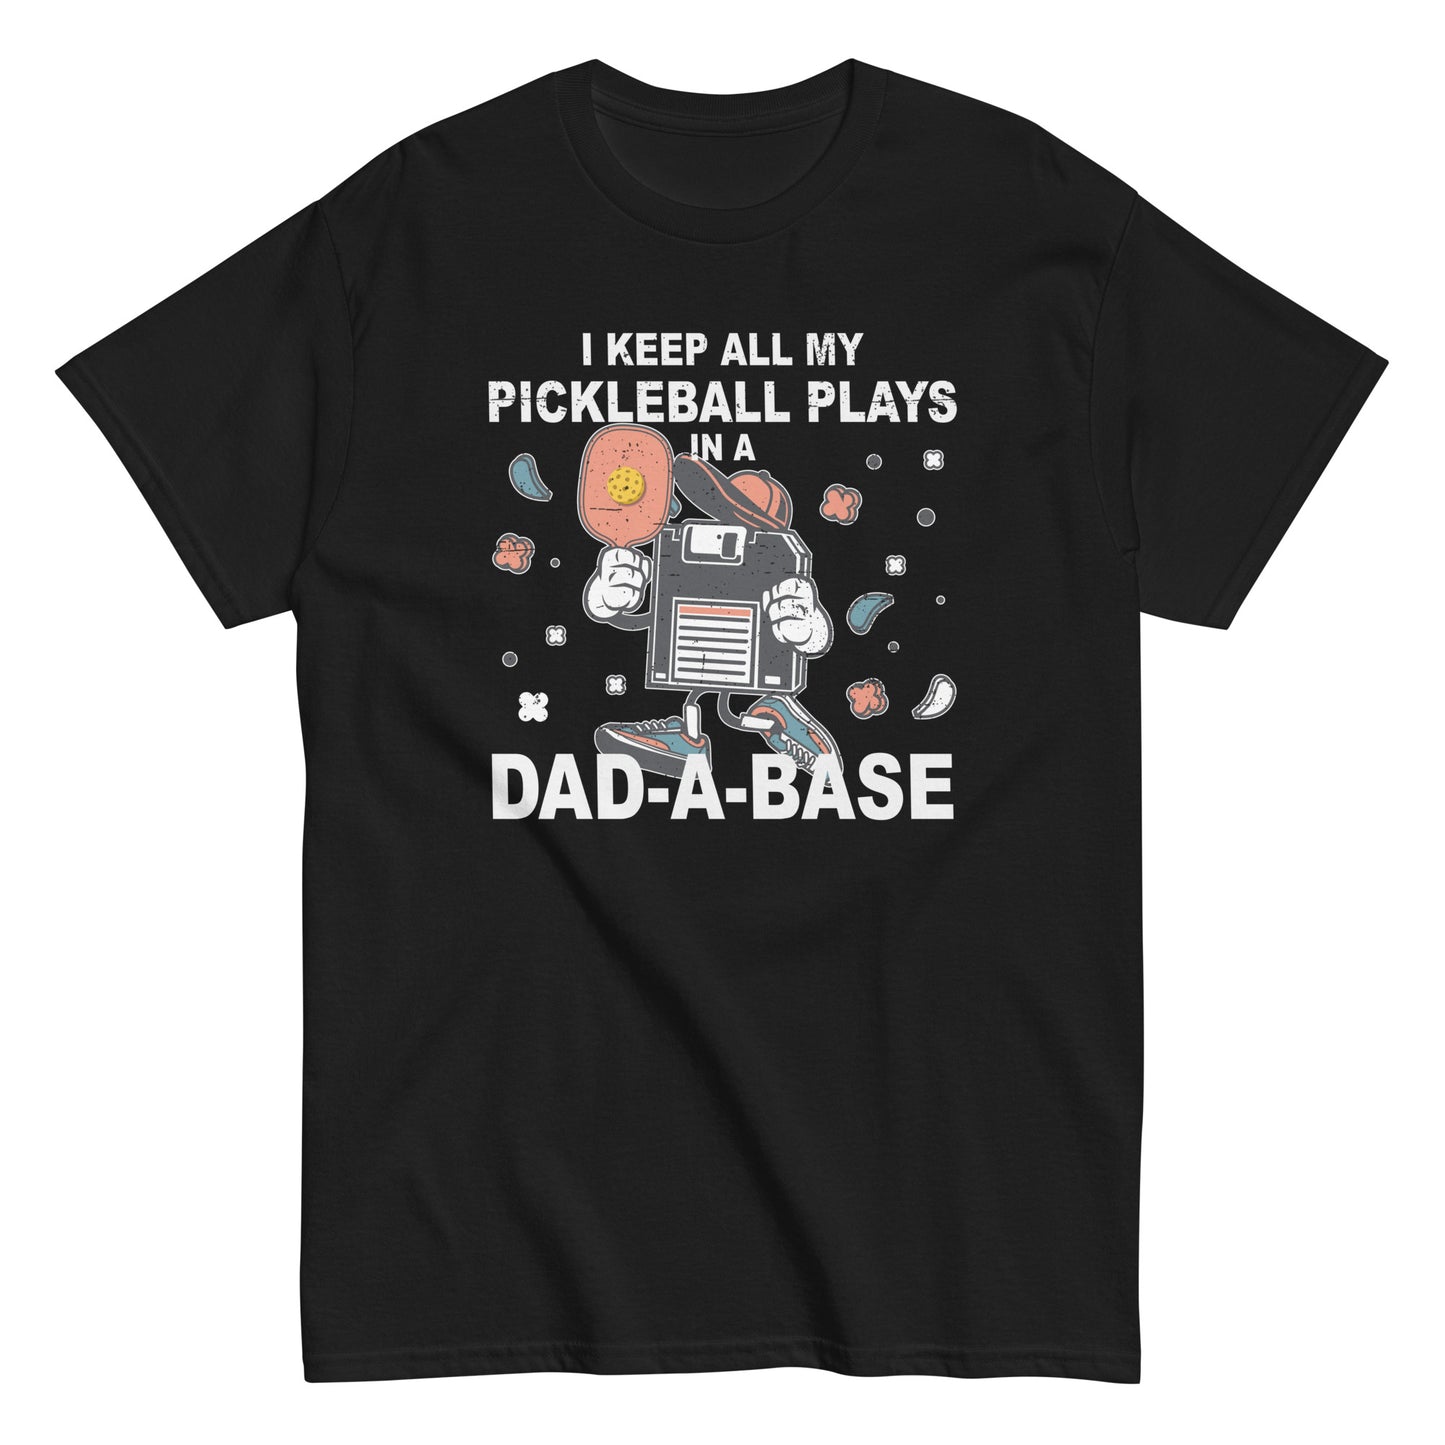 Retro Pickleball Pun: "I Keep All My Pickleball Plays In A Dad-A-Base", Father's Day Mens Black T-Shirt